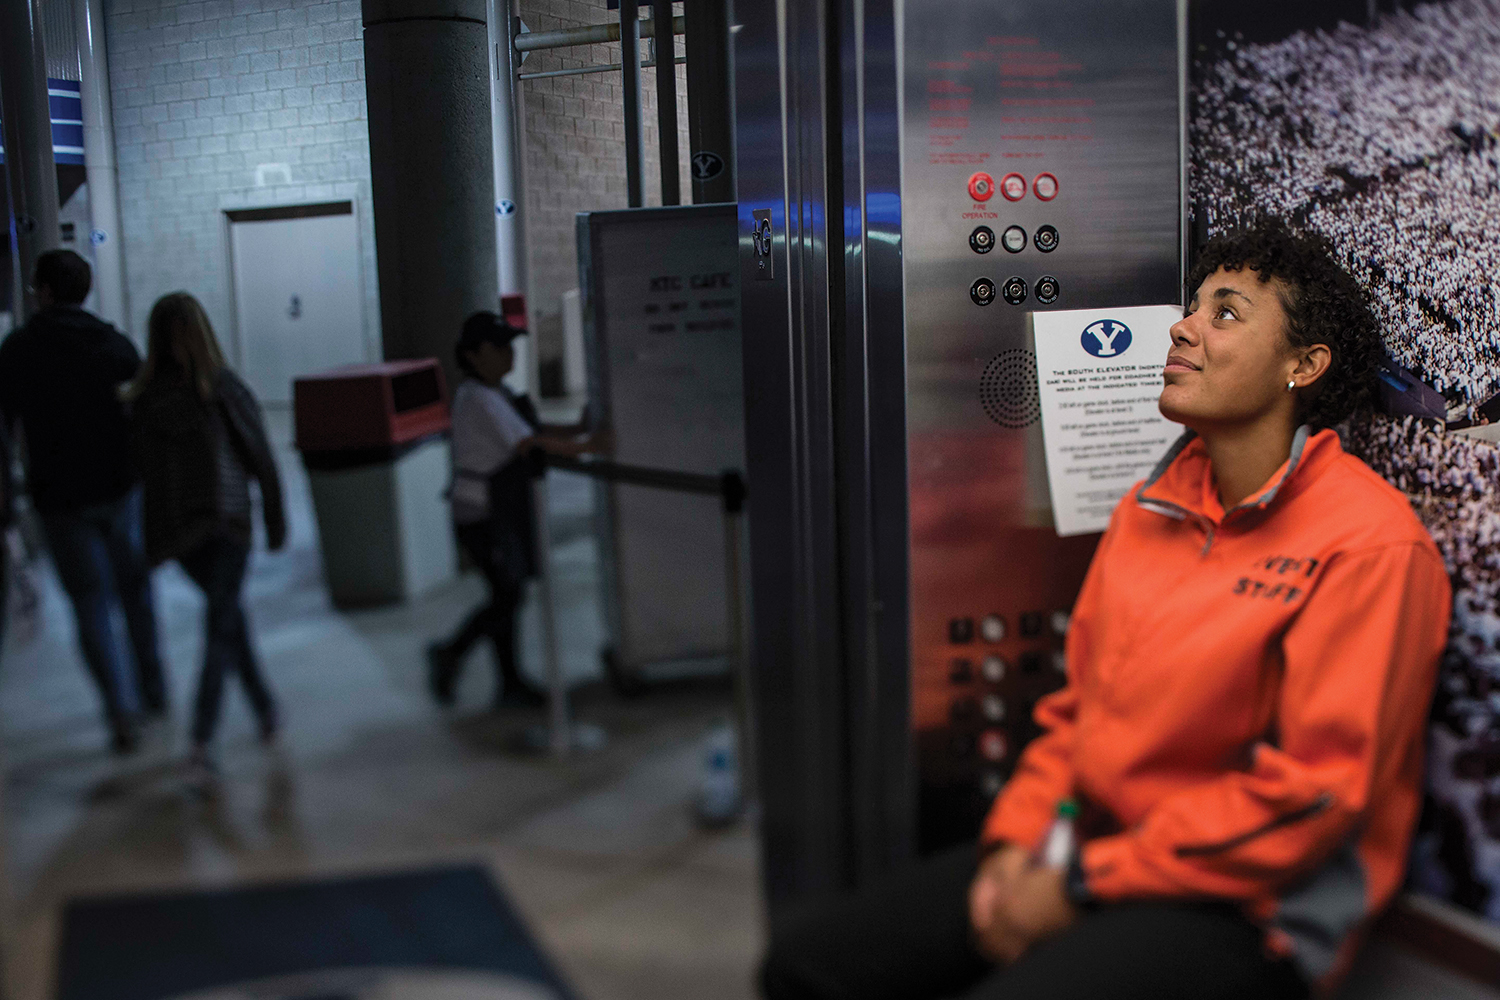 A BYU student elevator operator listens to the game audio as she waits inside the elevator.